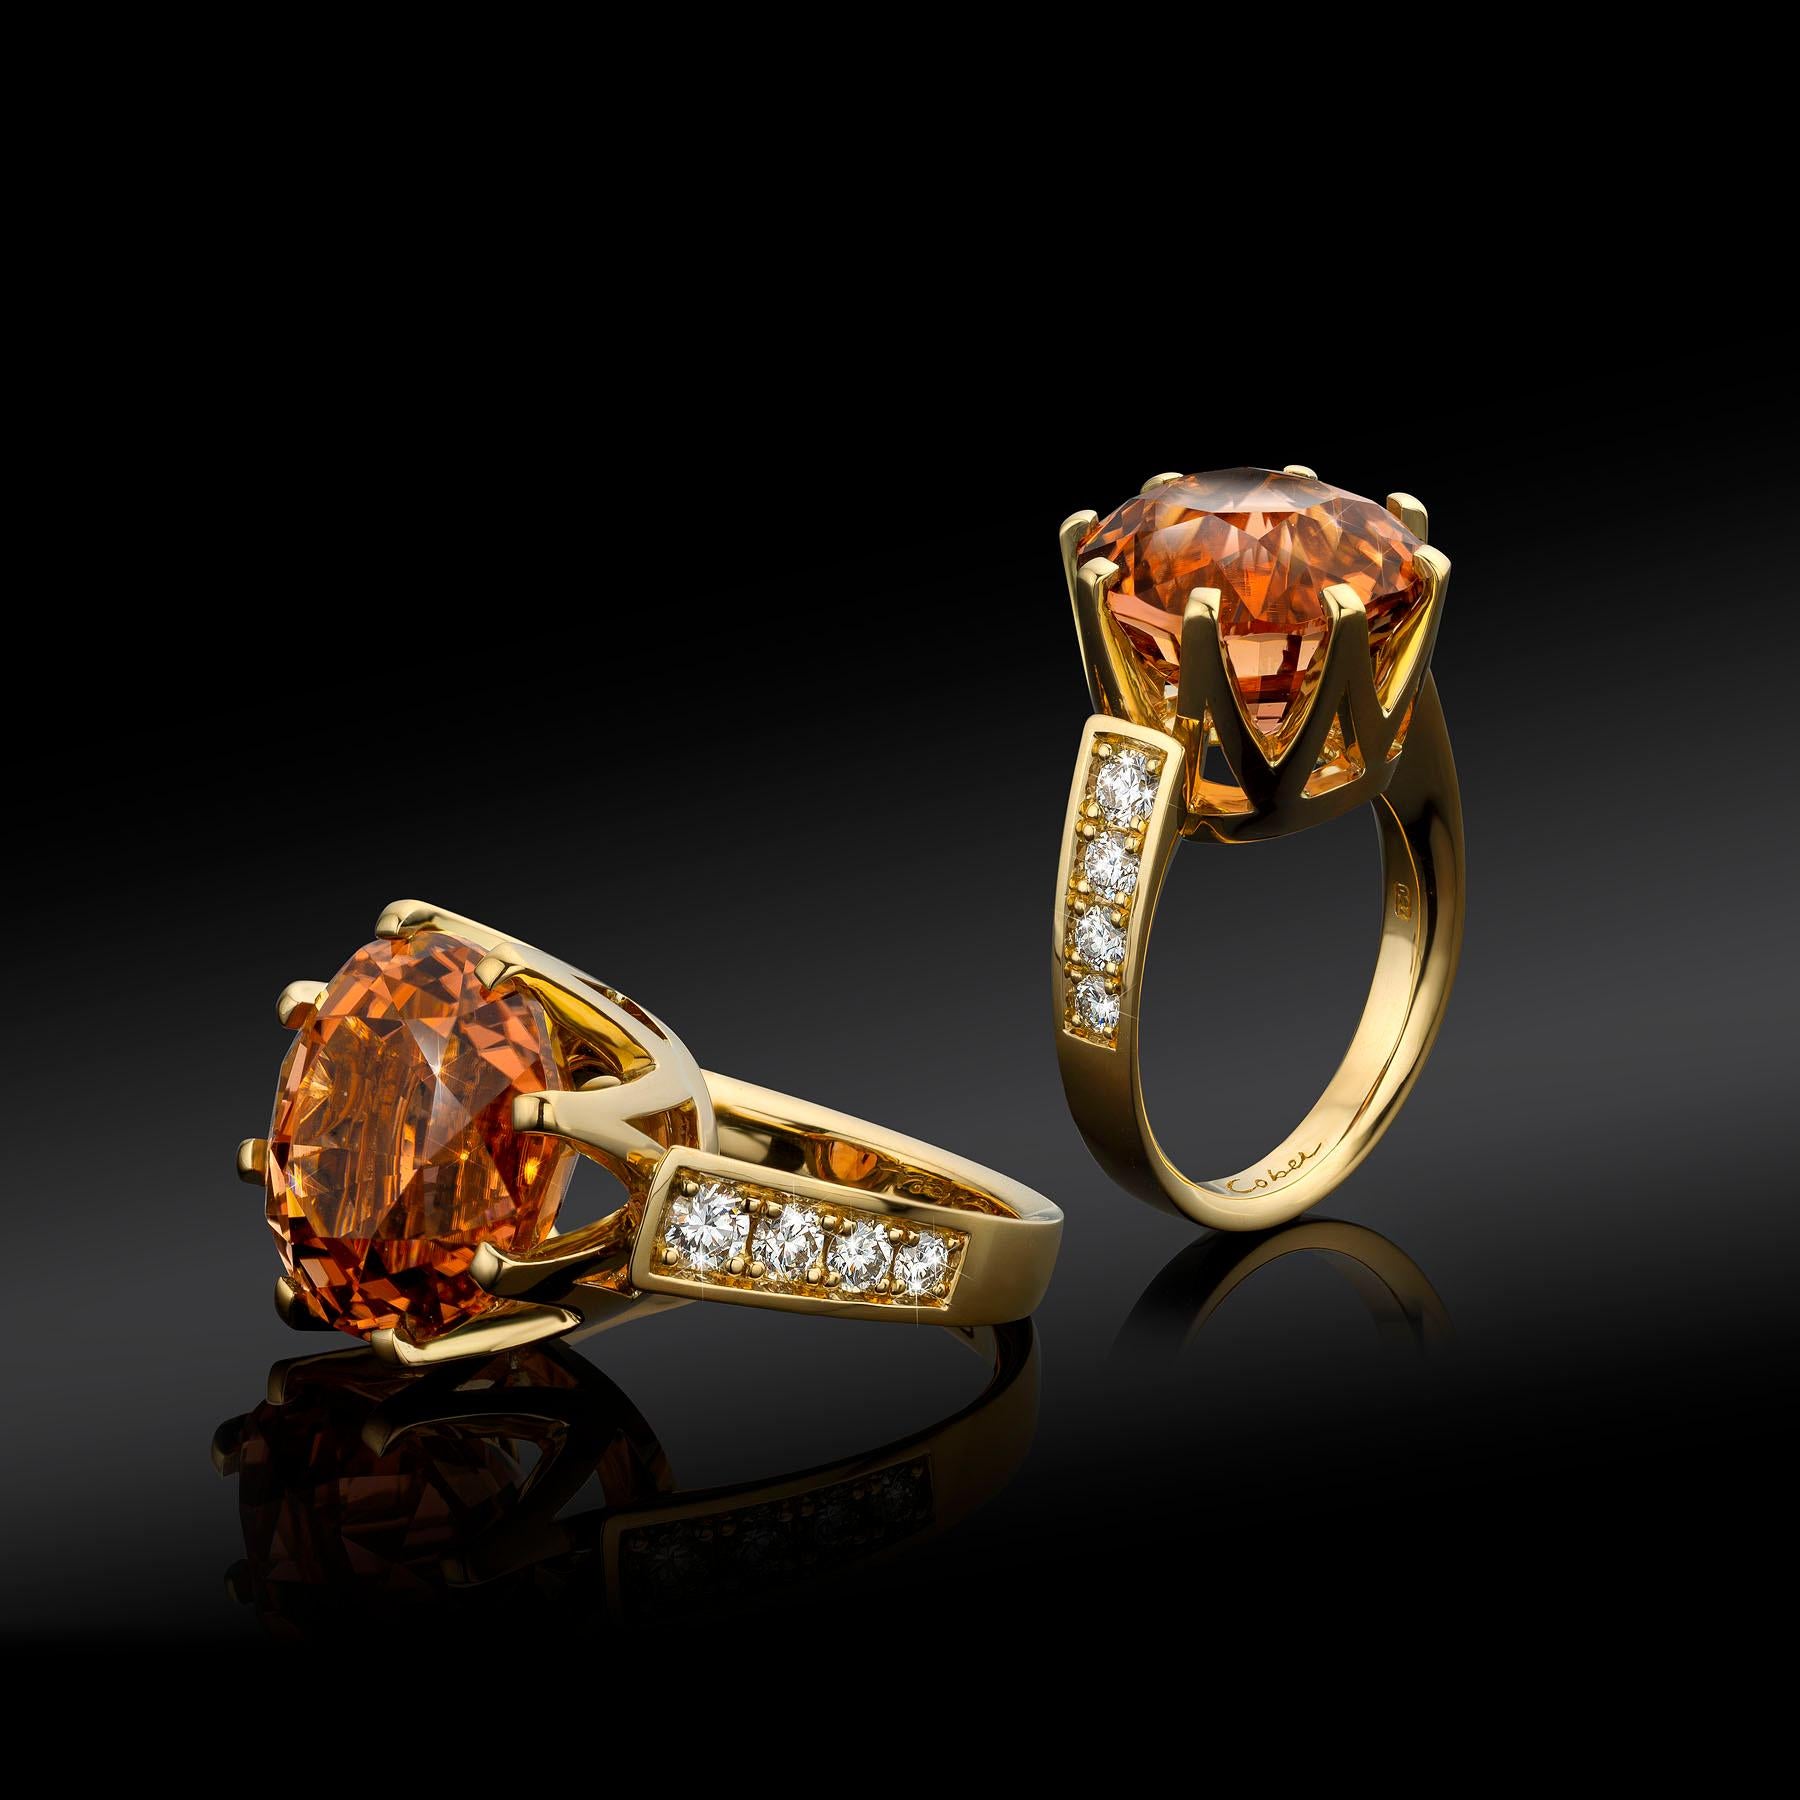 Brilliant Cut Cober “Queen Peach” with peach color Tourmaline and Diamonds Yellow Gold Ring  For Sale